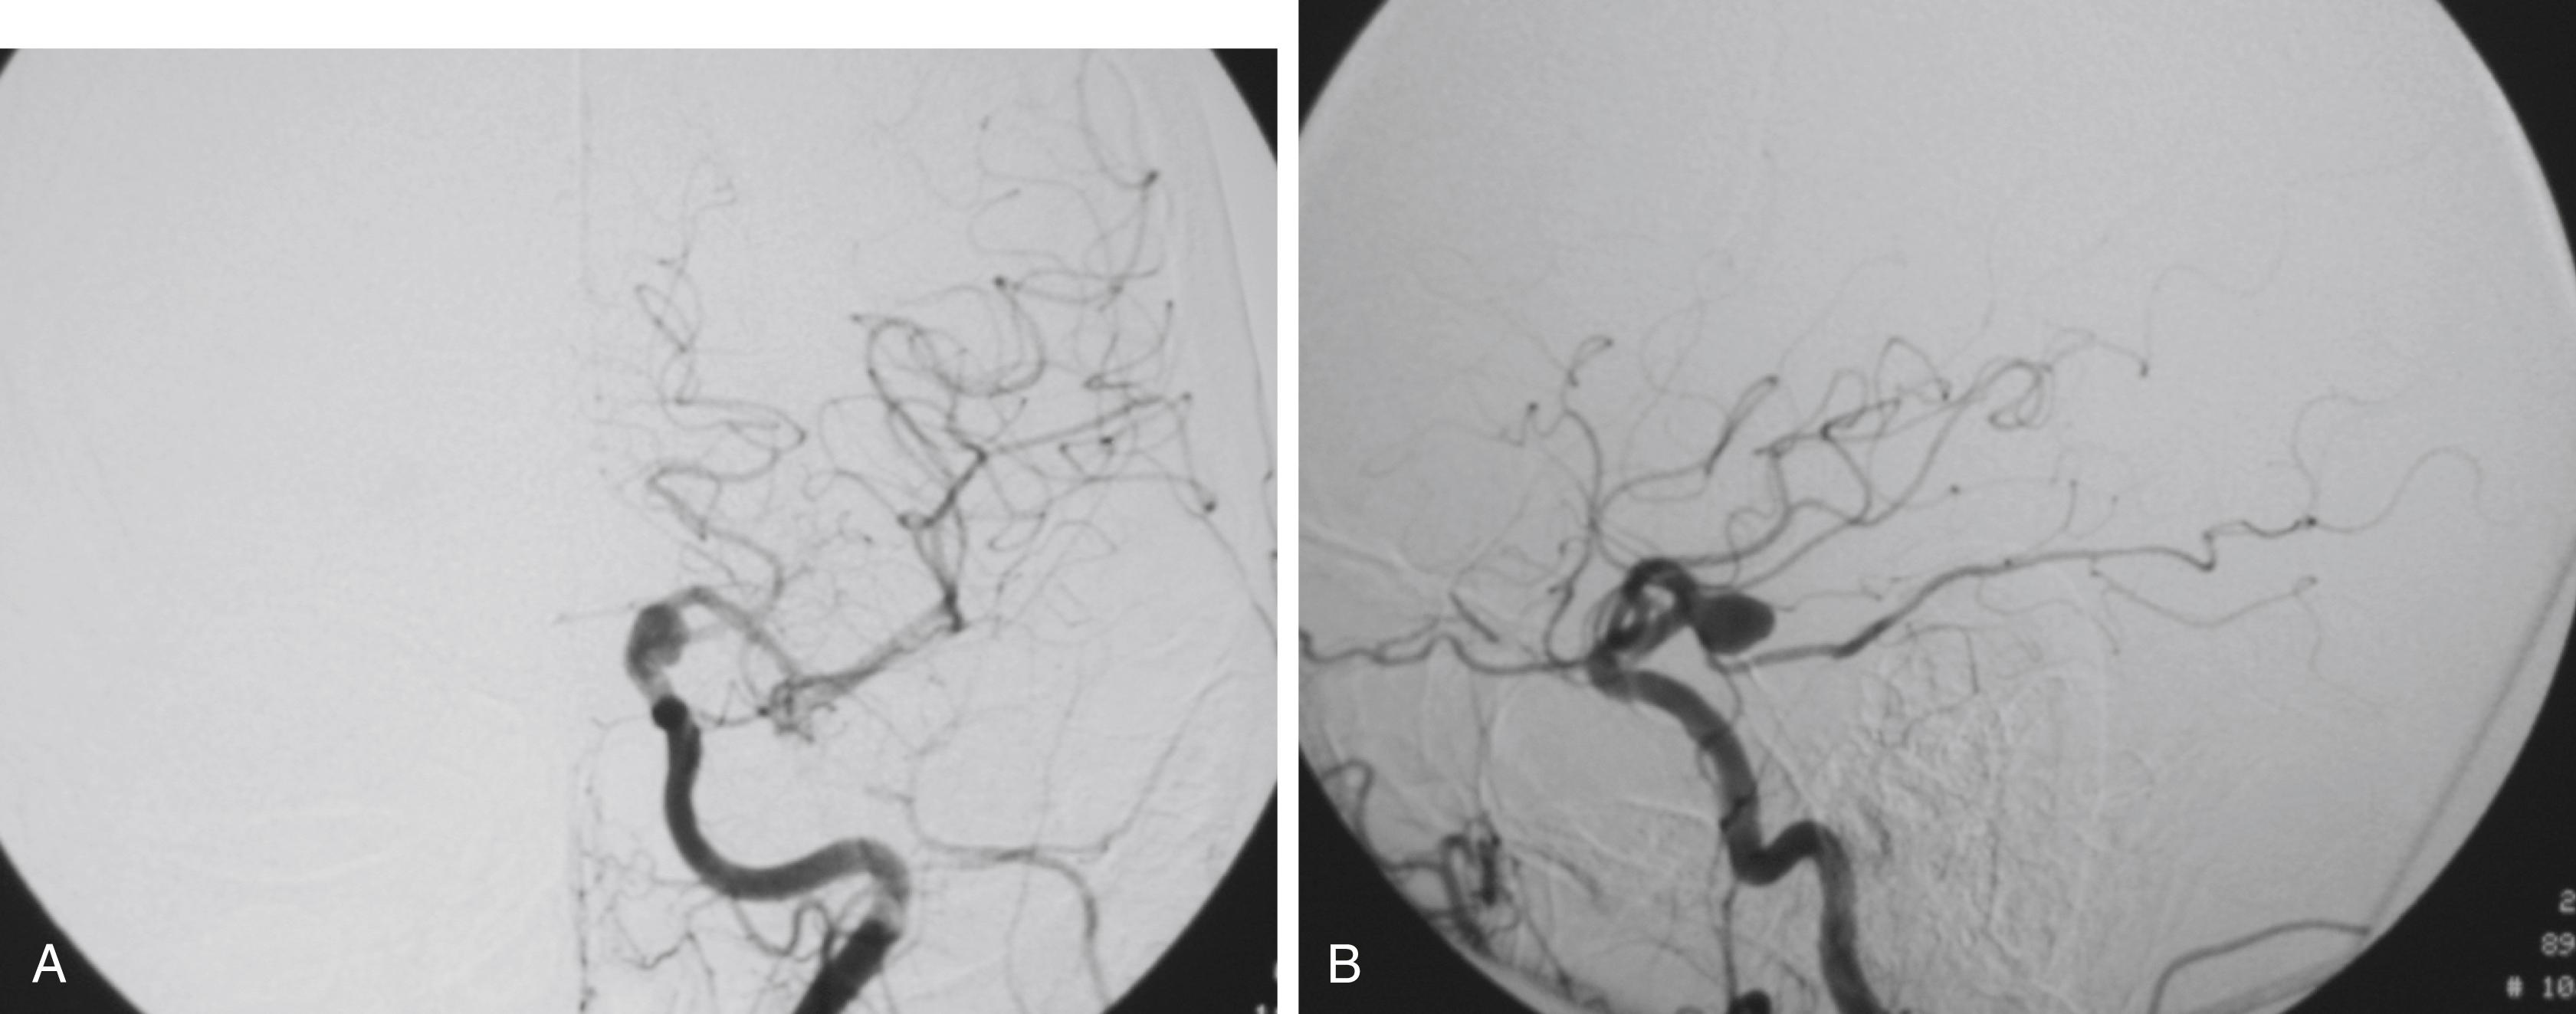 FIGURE 47.4, Left internal carotid artery injection on a digital subtraction angiography with an anterior choroidal artery aneurysm: anterior-posterior (A) and lateral (B) views.